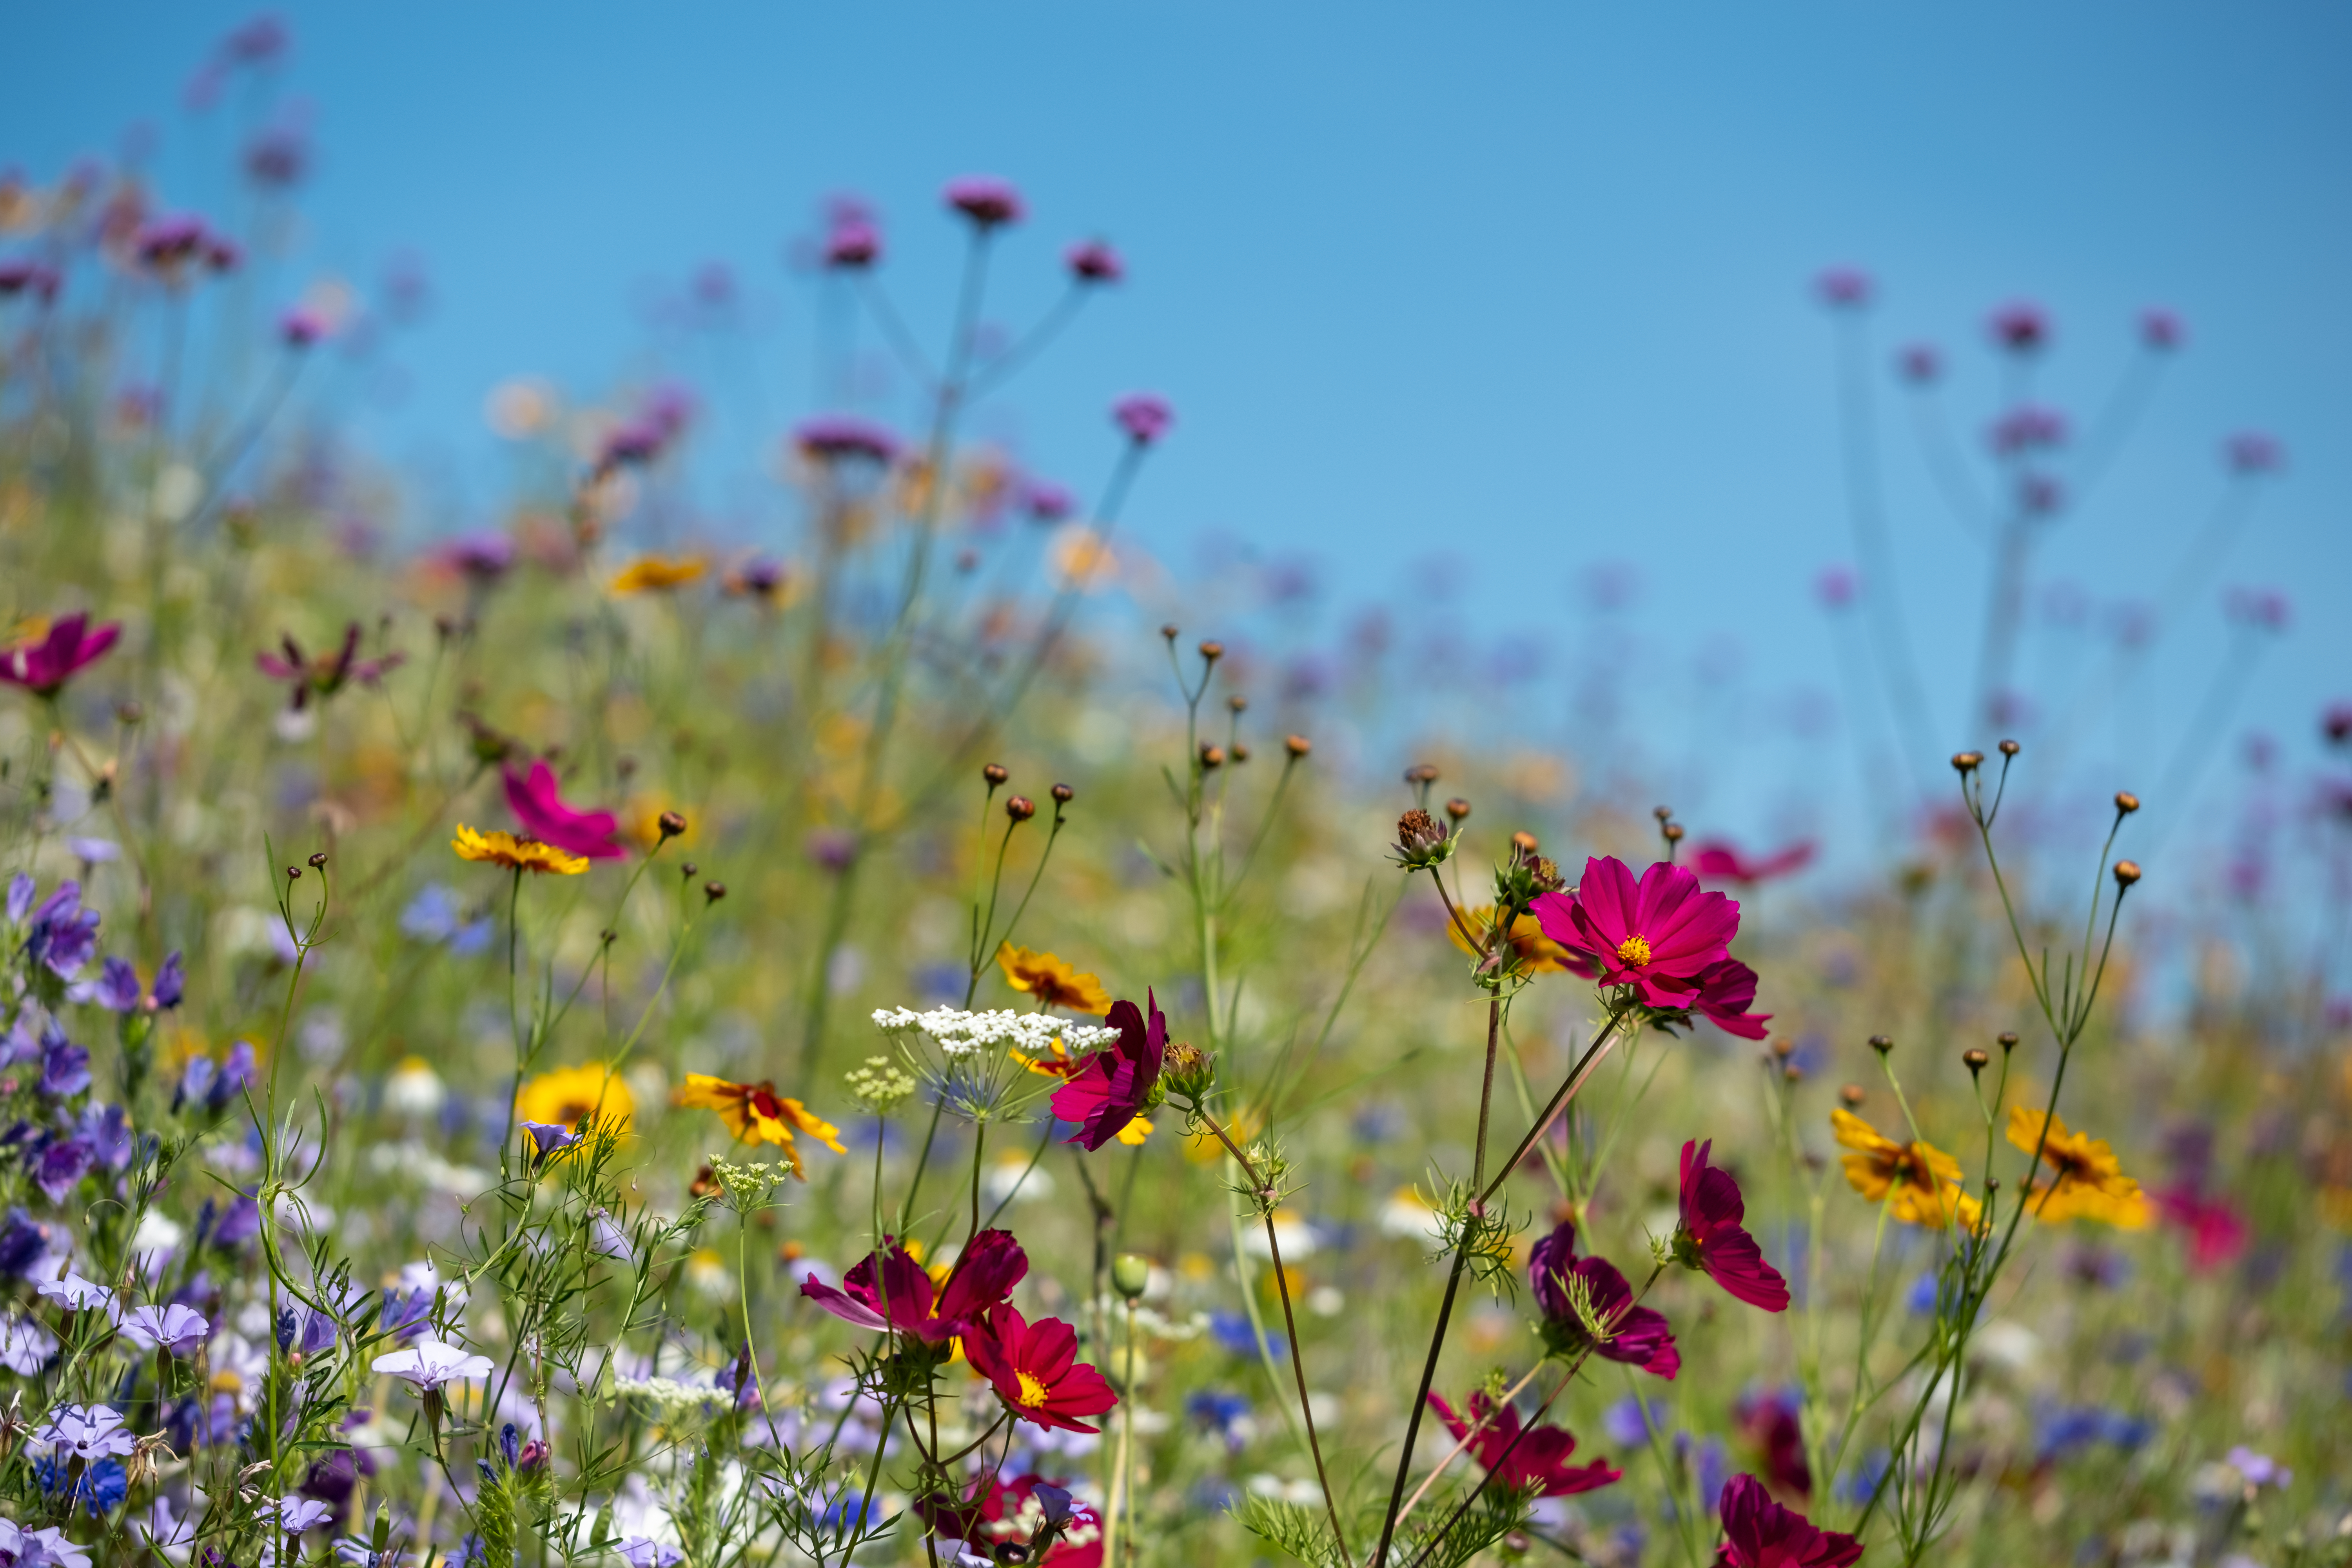 Wildflower seeds sent to residents to support biodiversity